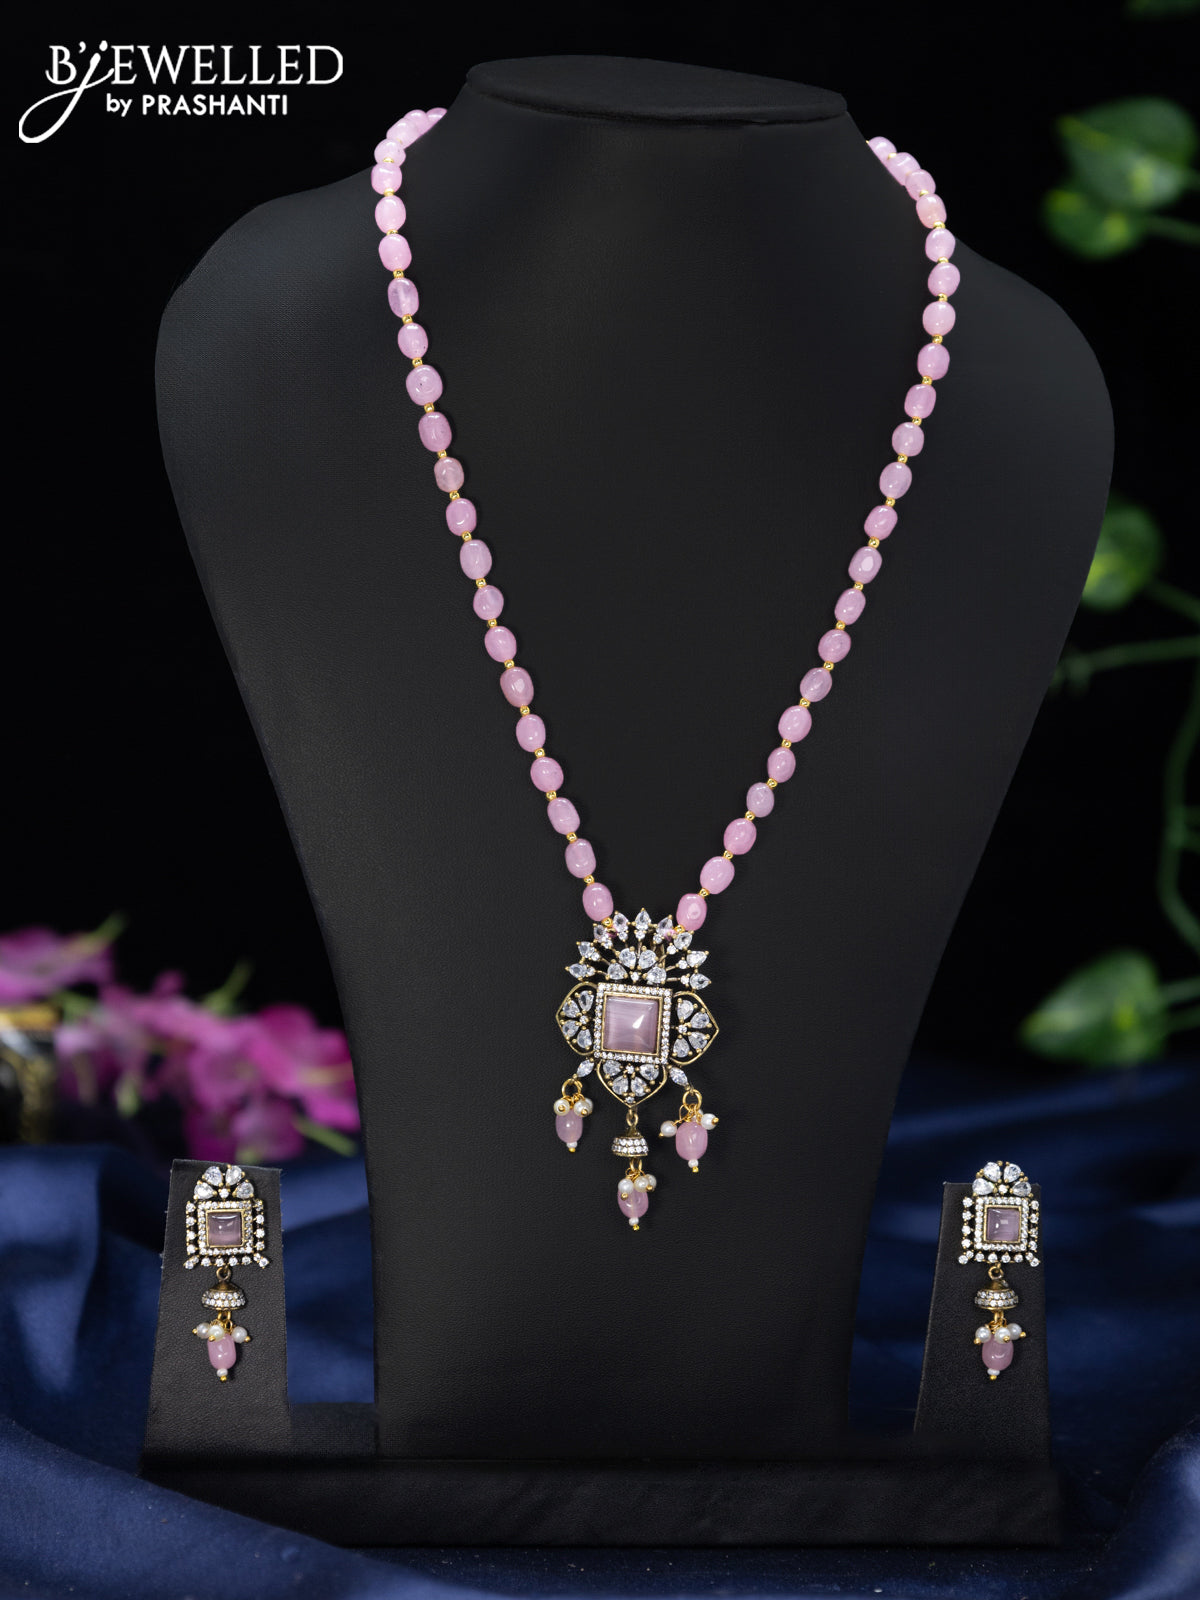 Beaded baby pink necklace with emerald & cz stones and pearl hangings in victorian finish